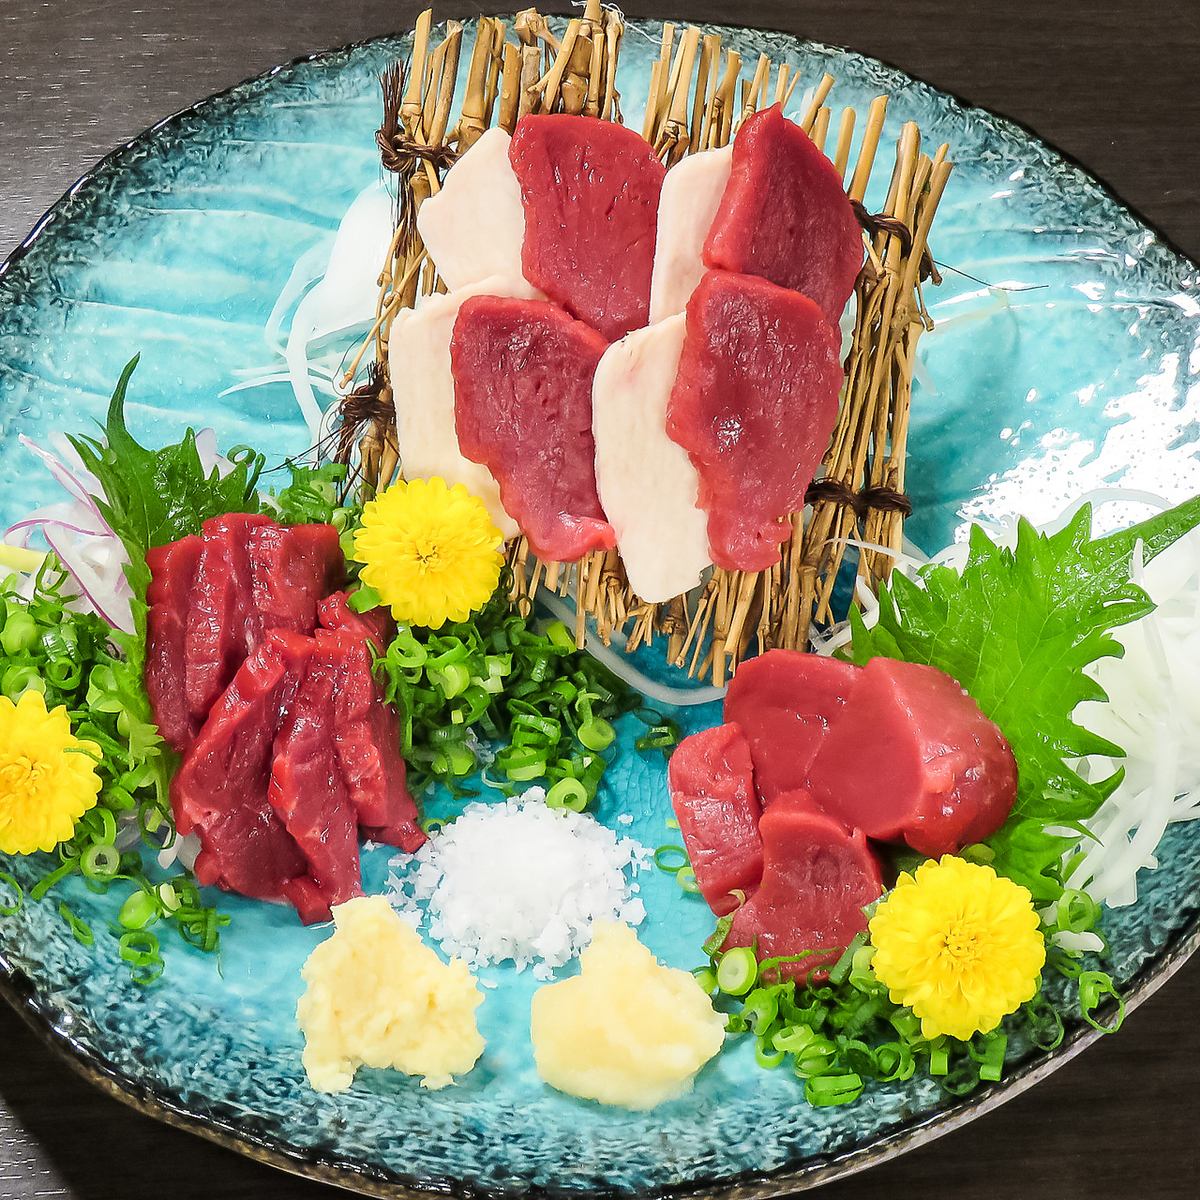 There is an all-you-can-eat plan where you can enjoy authentic horse meat dishes to your heart's content ♪ Come and enjoy our special lean meat!